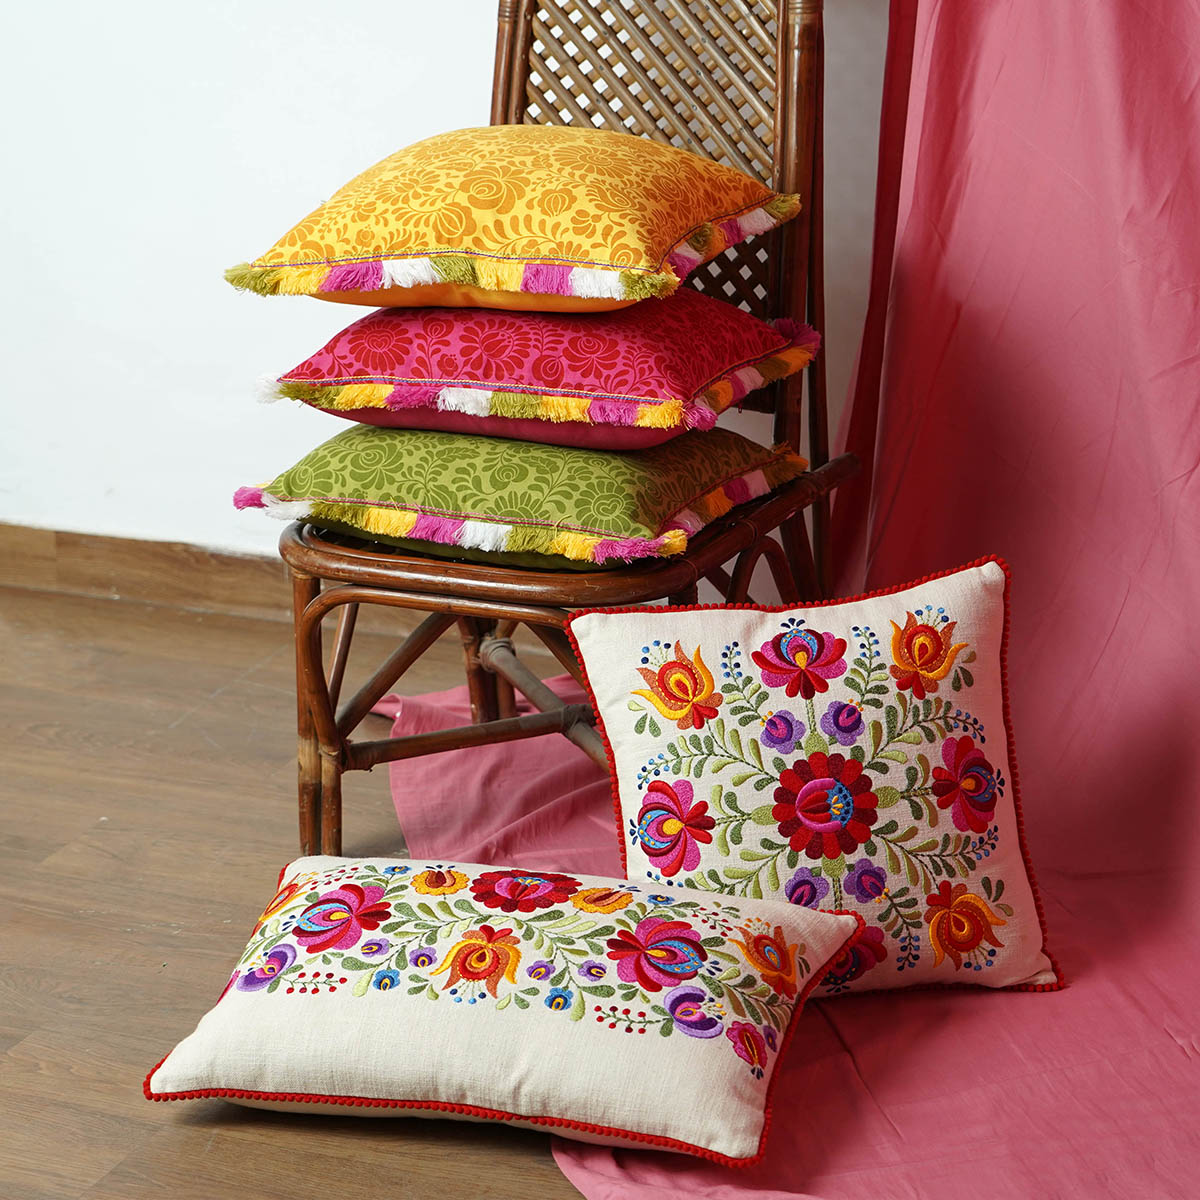 MATYO - Hot Pink printed cotton Pillow cover with multicolour acrylic fringe, sizes available